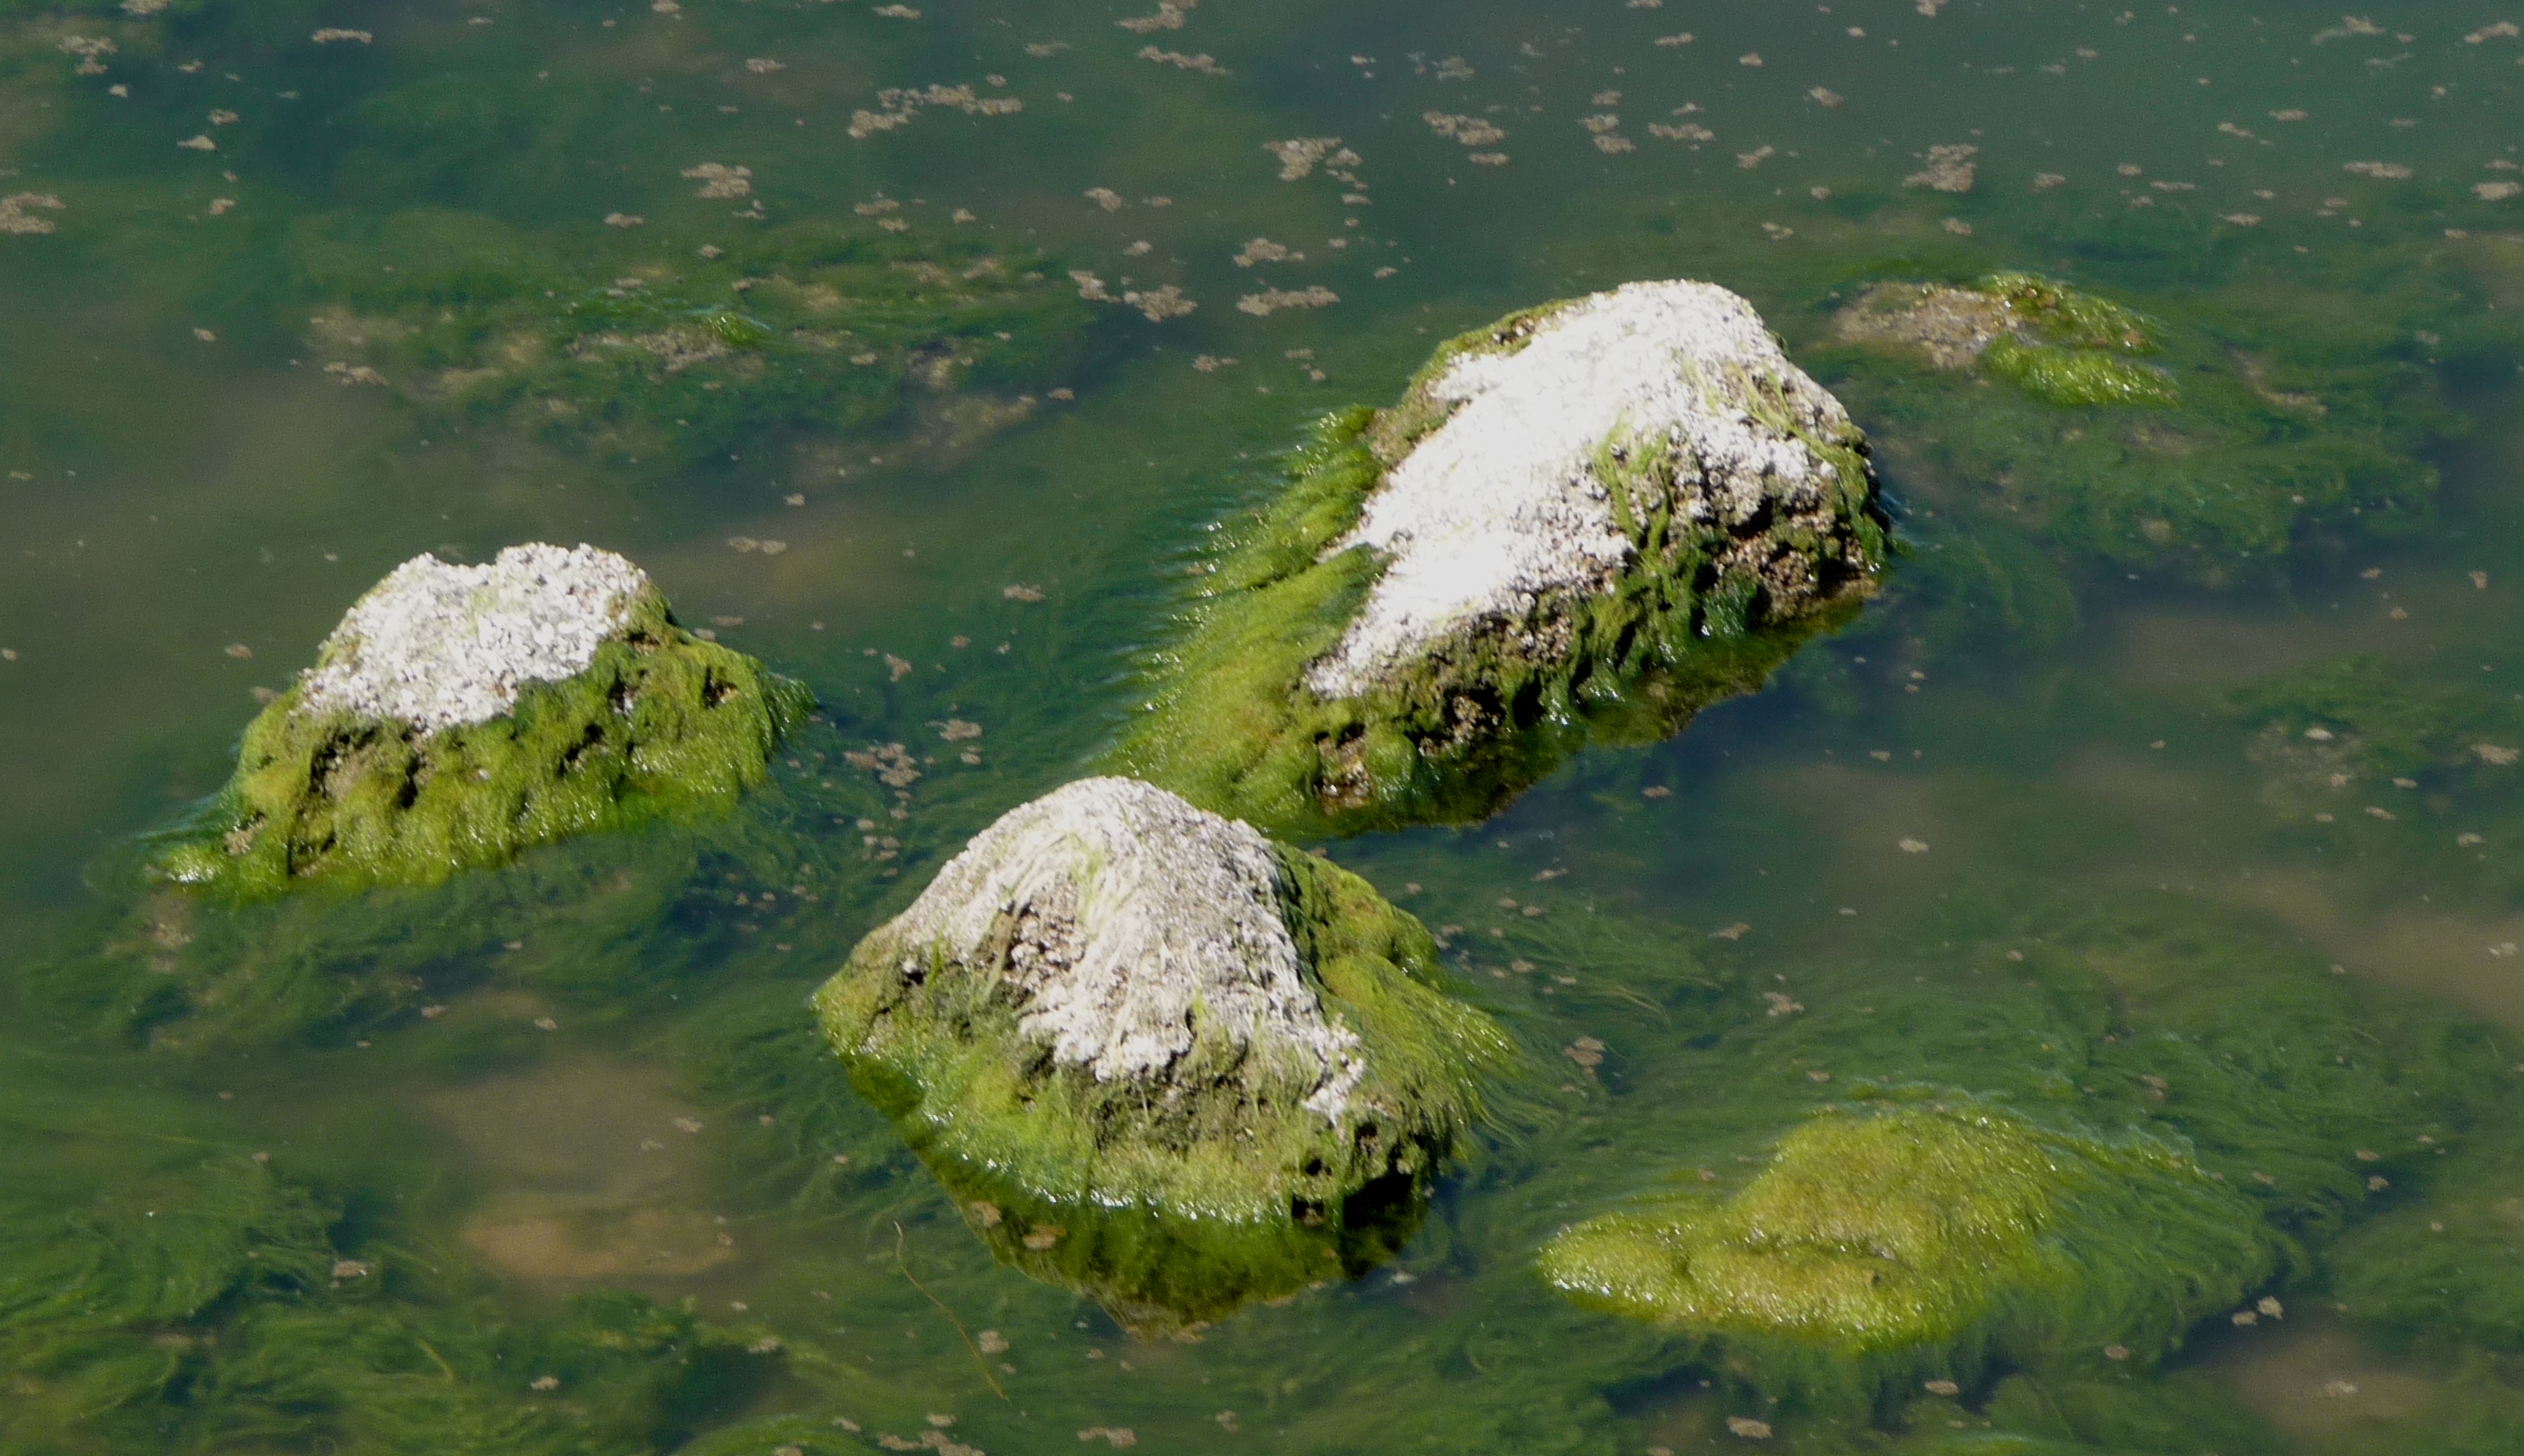 A photograph of algae growing in water and rocks. 